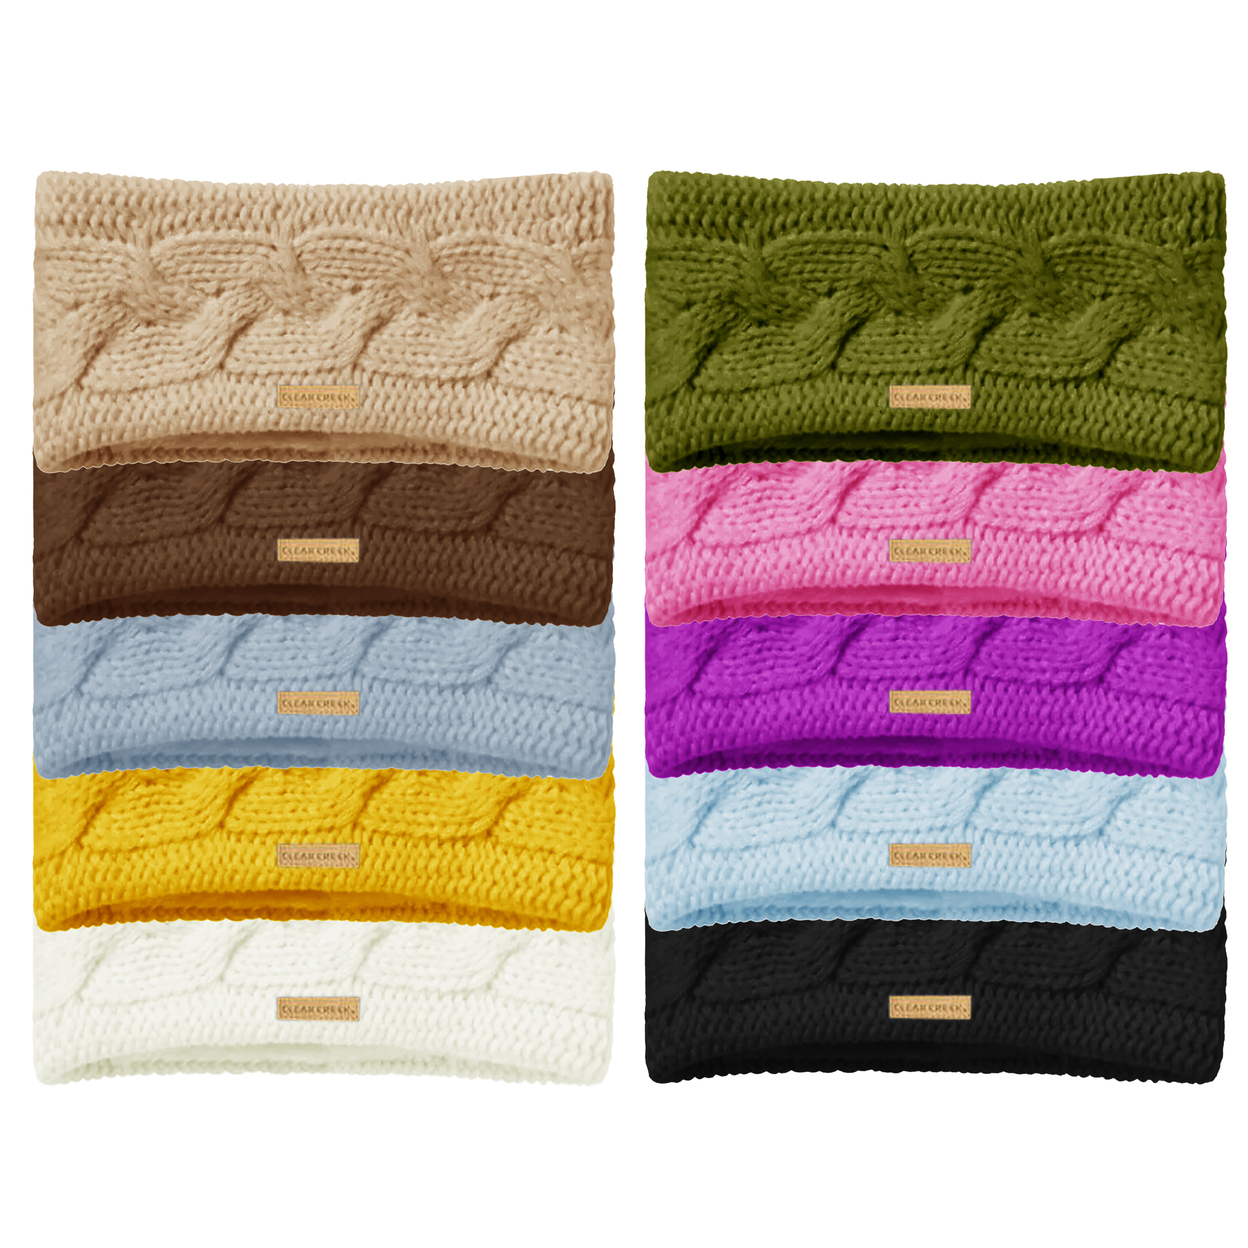 3-Pack: Womens Ultra-Soft Cozy Polar Fleece Lined Cable Knit Popcorn Stitch Headband - Assorted